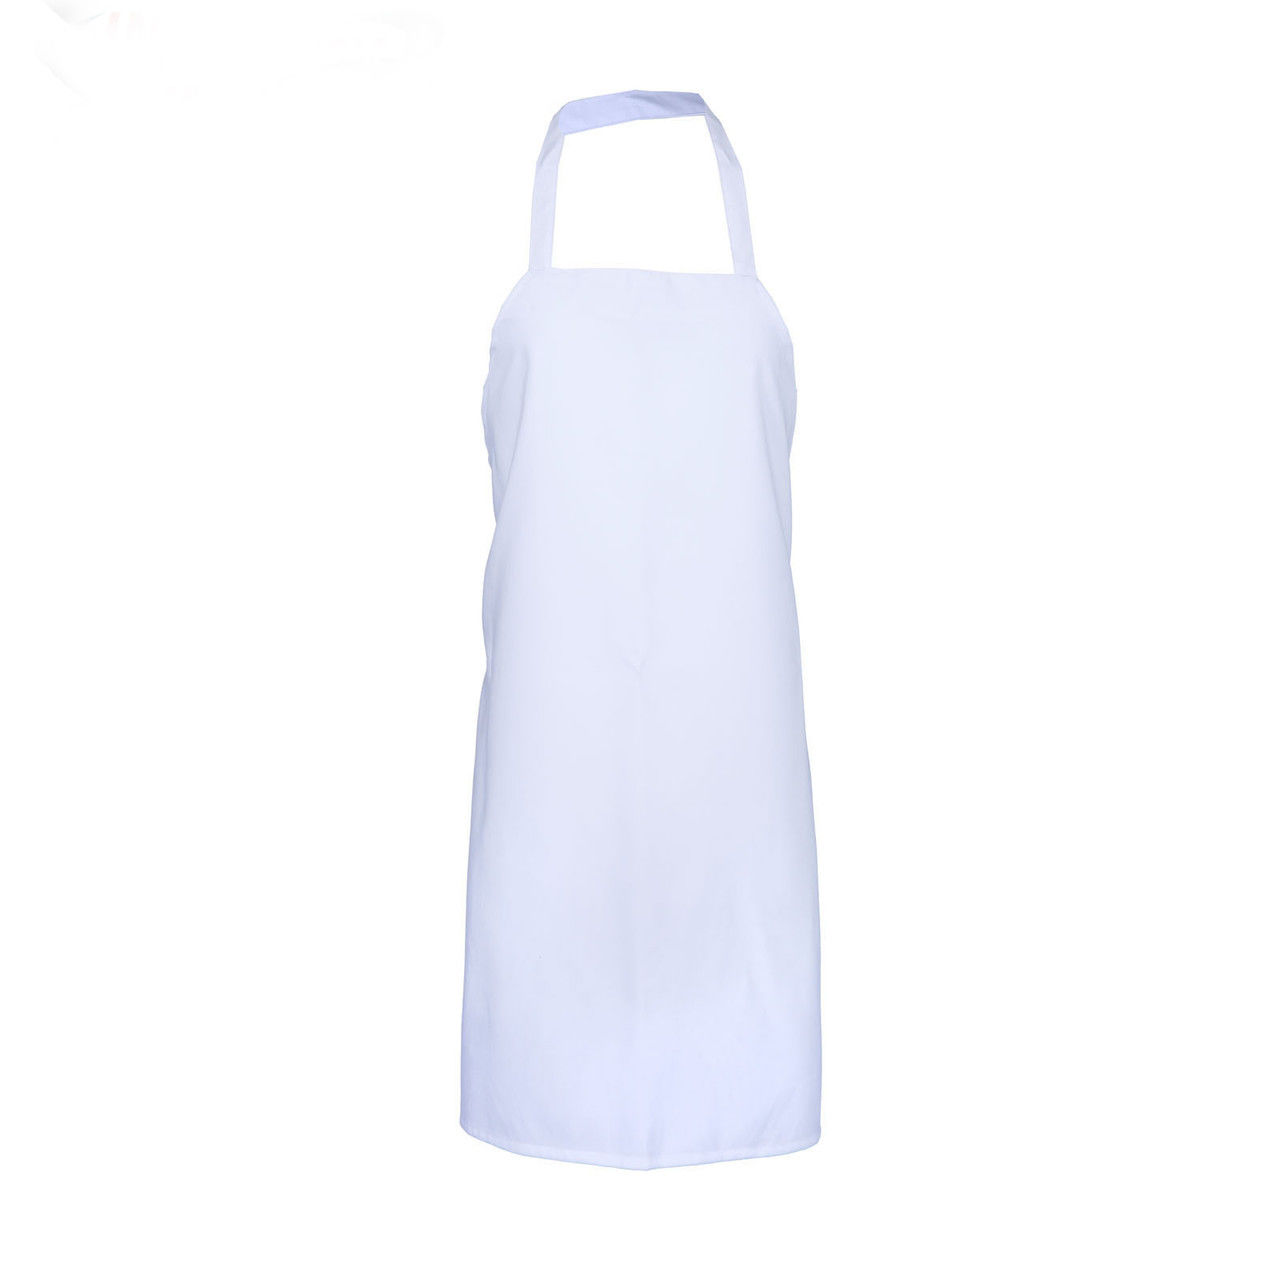 Are these cheap aprons? The price is very inexpensive.